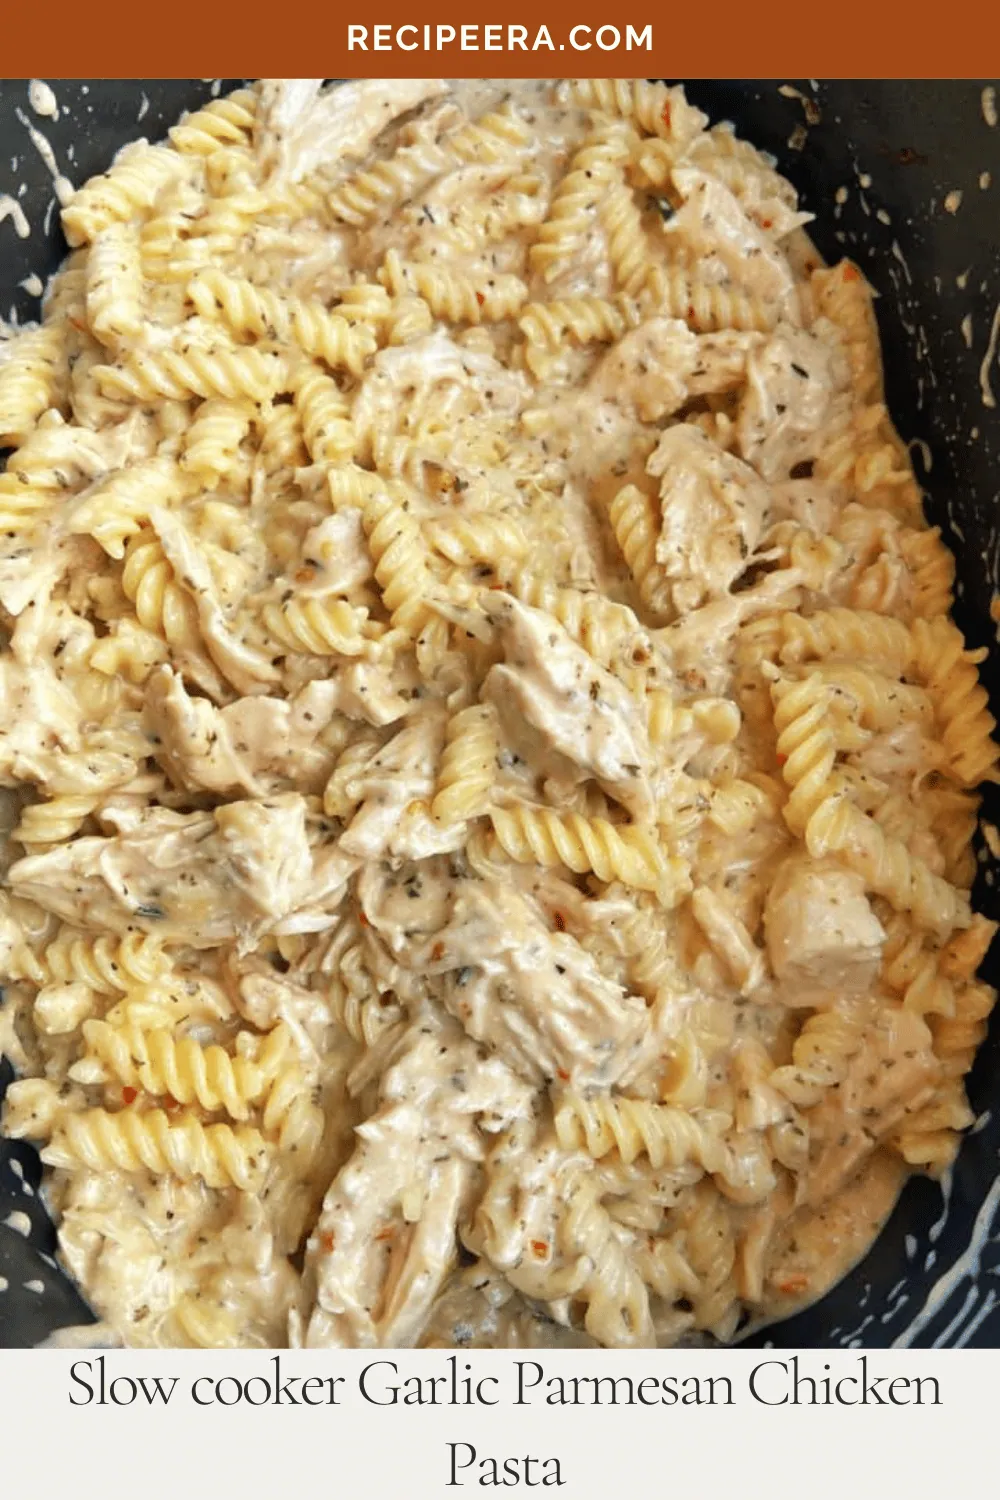 Creamy, flavorful chicken pasta cooked to perfection in a slow cooker with garlic parmesan sauce and tender red potatoes.